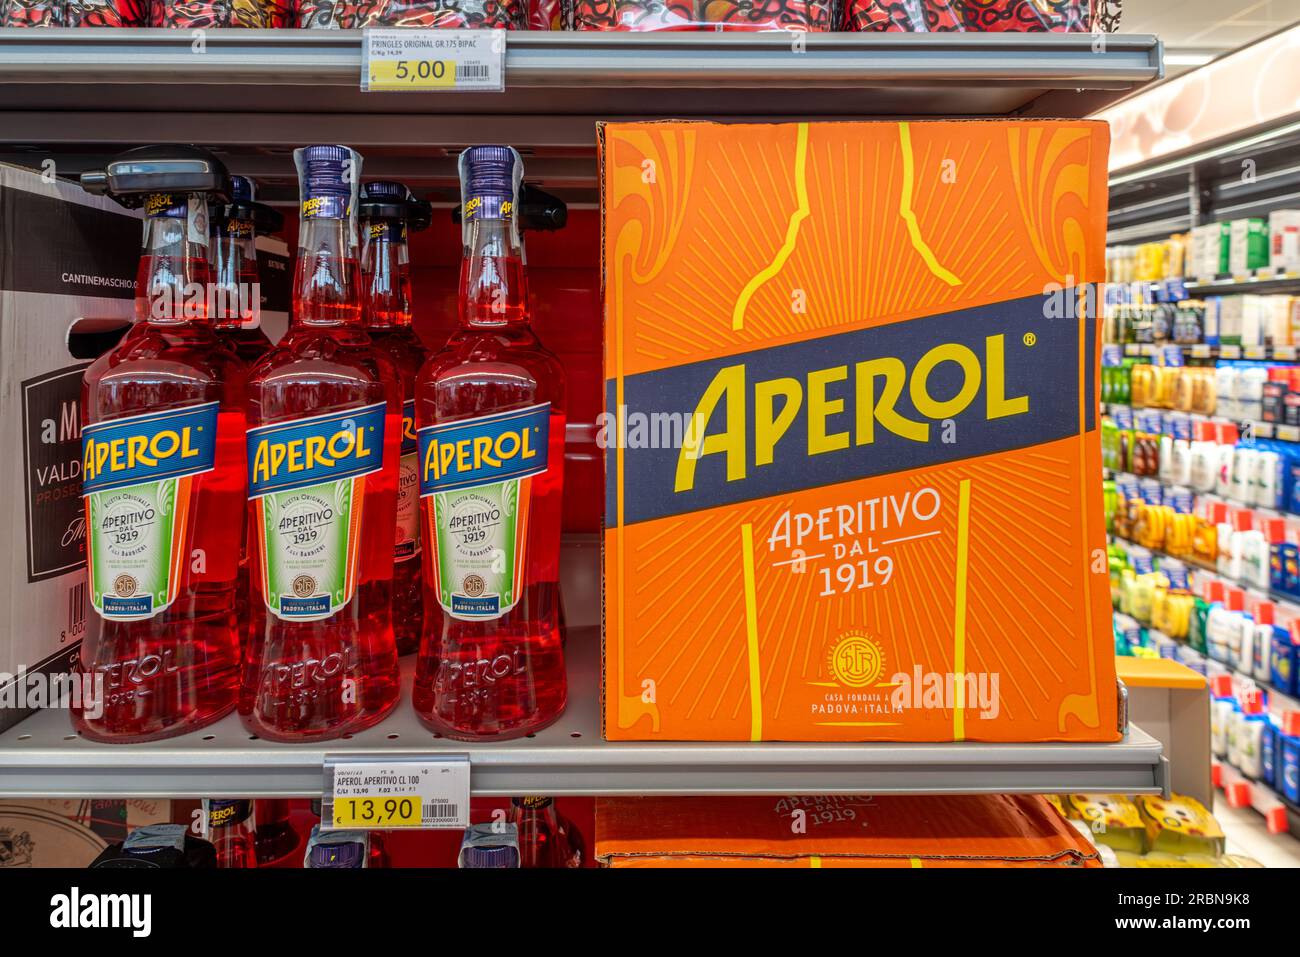 Italy - July 10, 2023: Aperol bottles and box on shelf for sale in Italian supermarket. Aperol Italian aperitif liqueur for making spritz cocktails ma Stock Photo